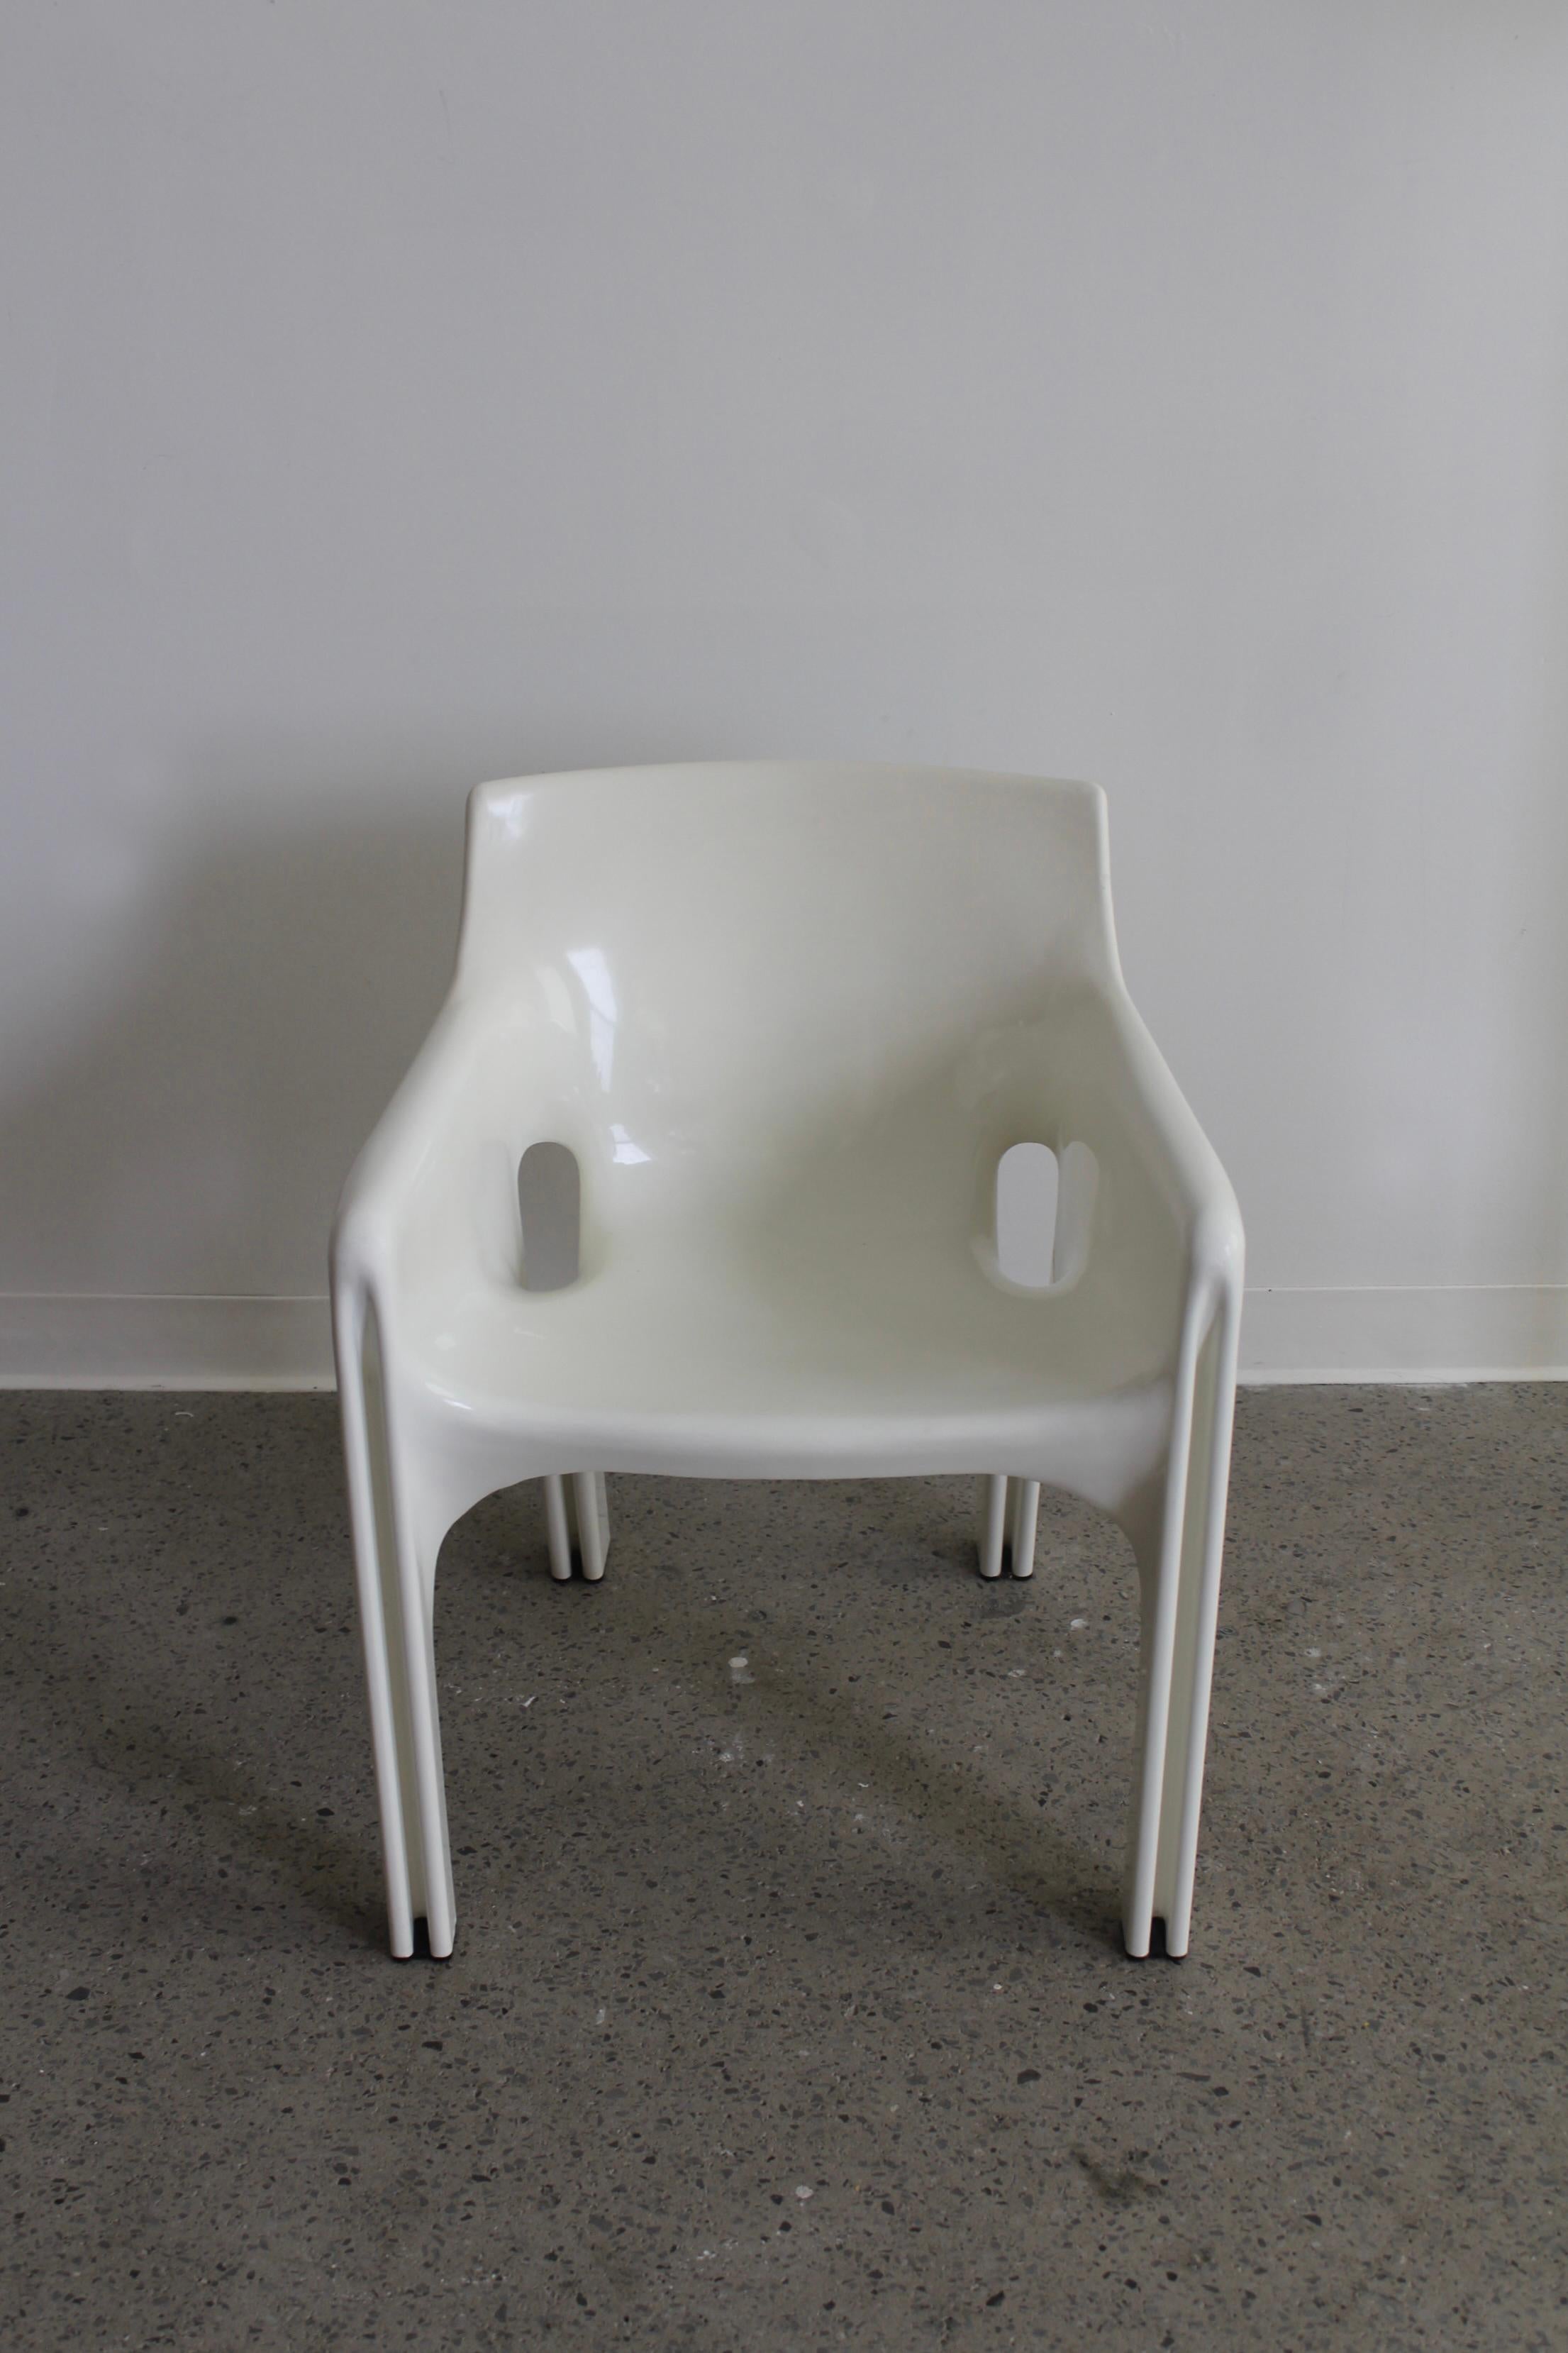 Gaudi Armchair by Vico Magistretti for Artemide, made in Italy, 1970s. Named after architect Antoni Gaudi, the organic lines and form of the chair are heavily influenced by Gaudi's style. Made of molded fibreglass reinforced plastic with a high